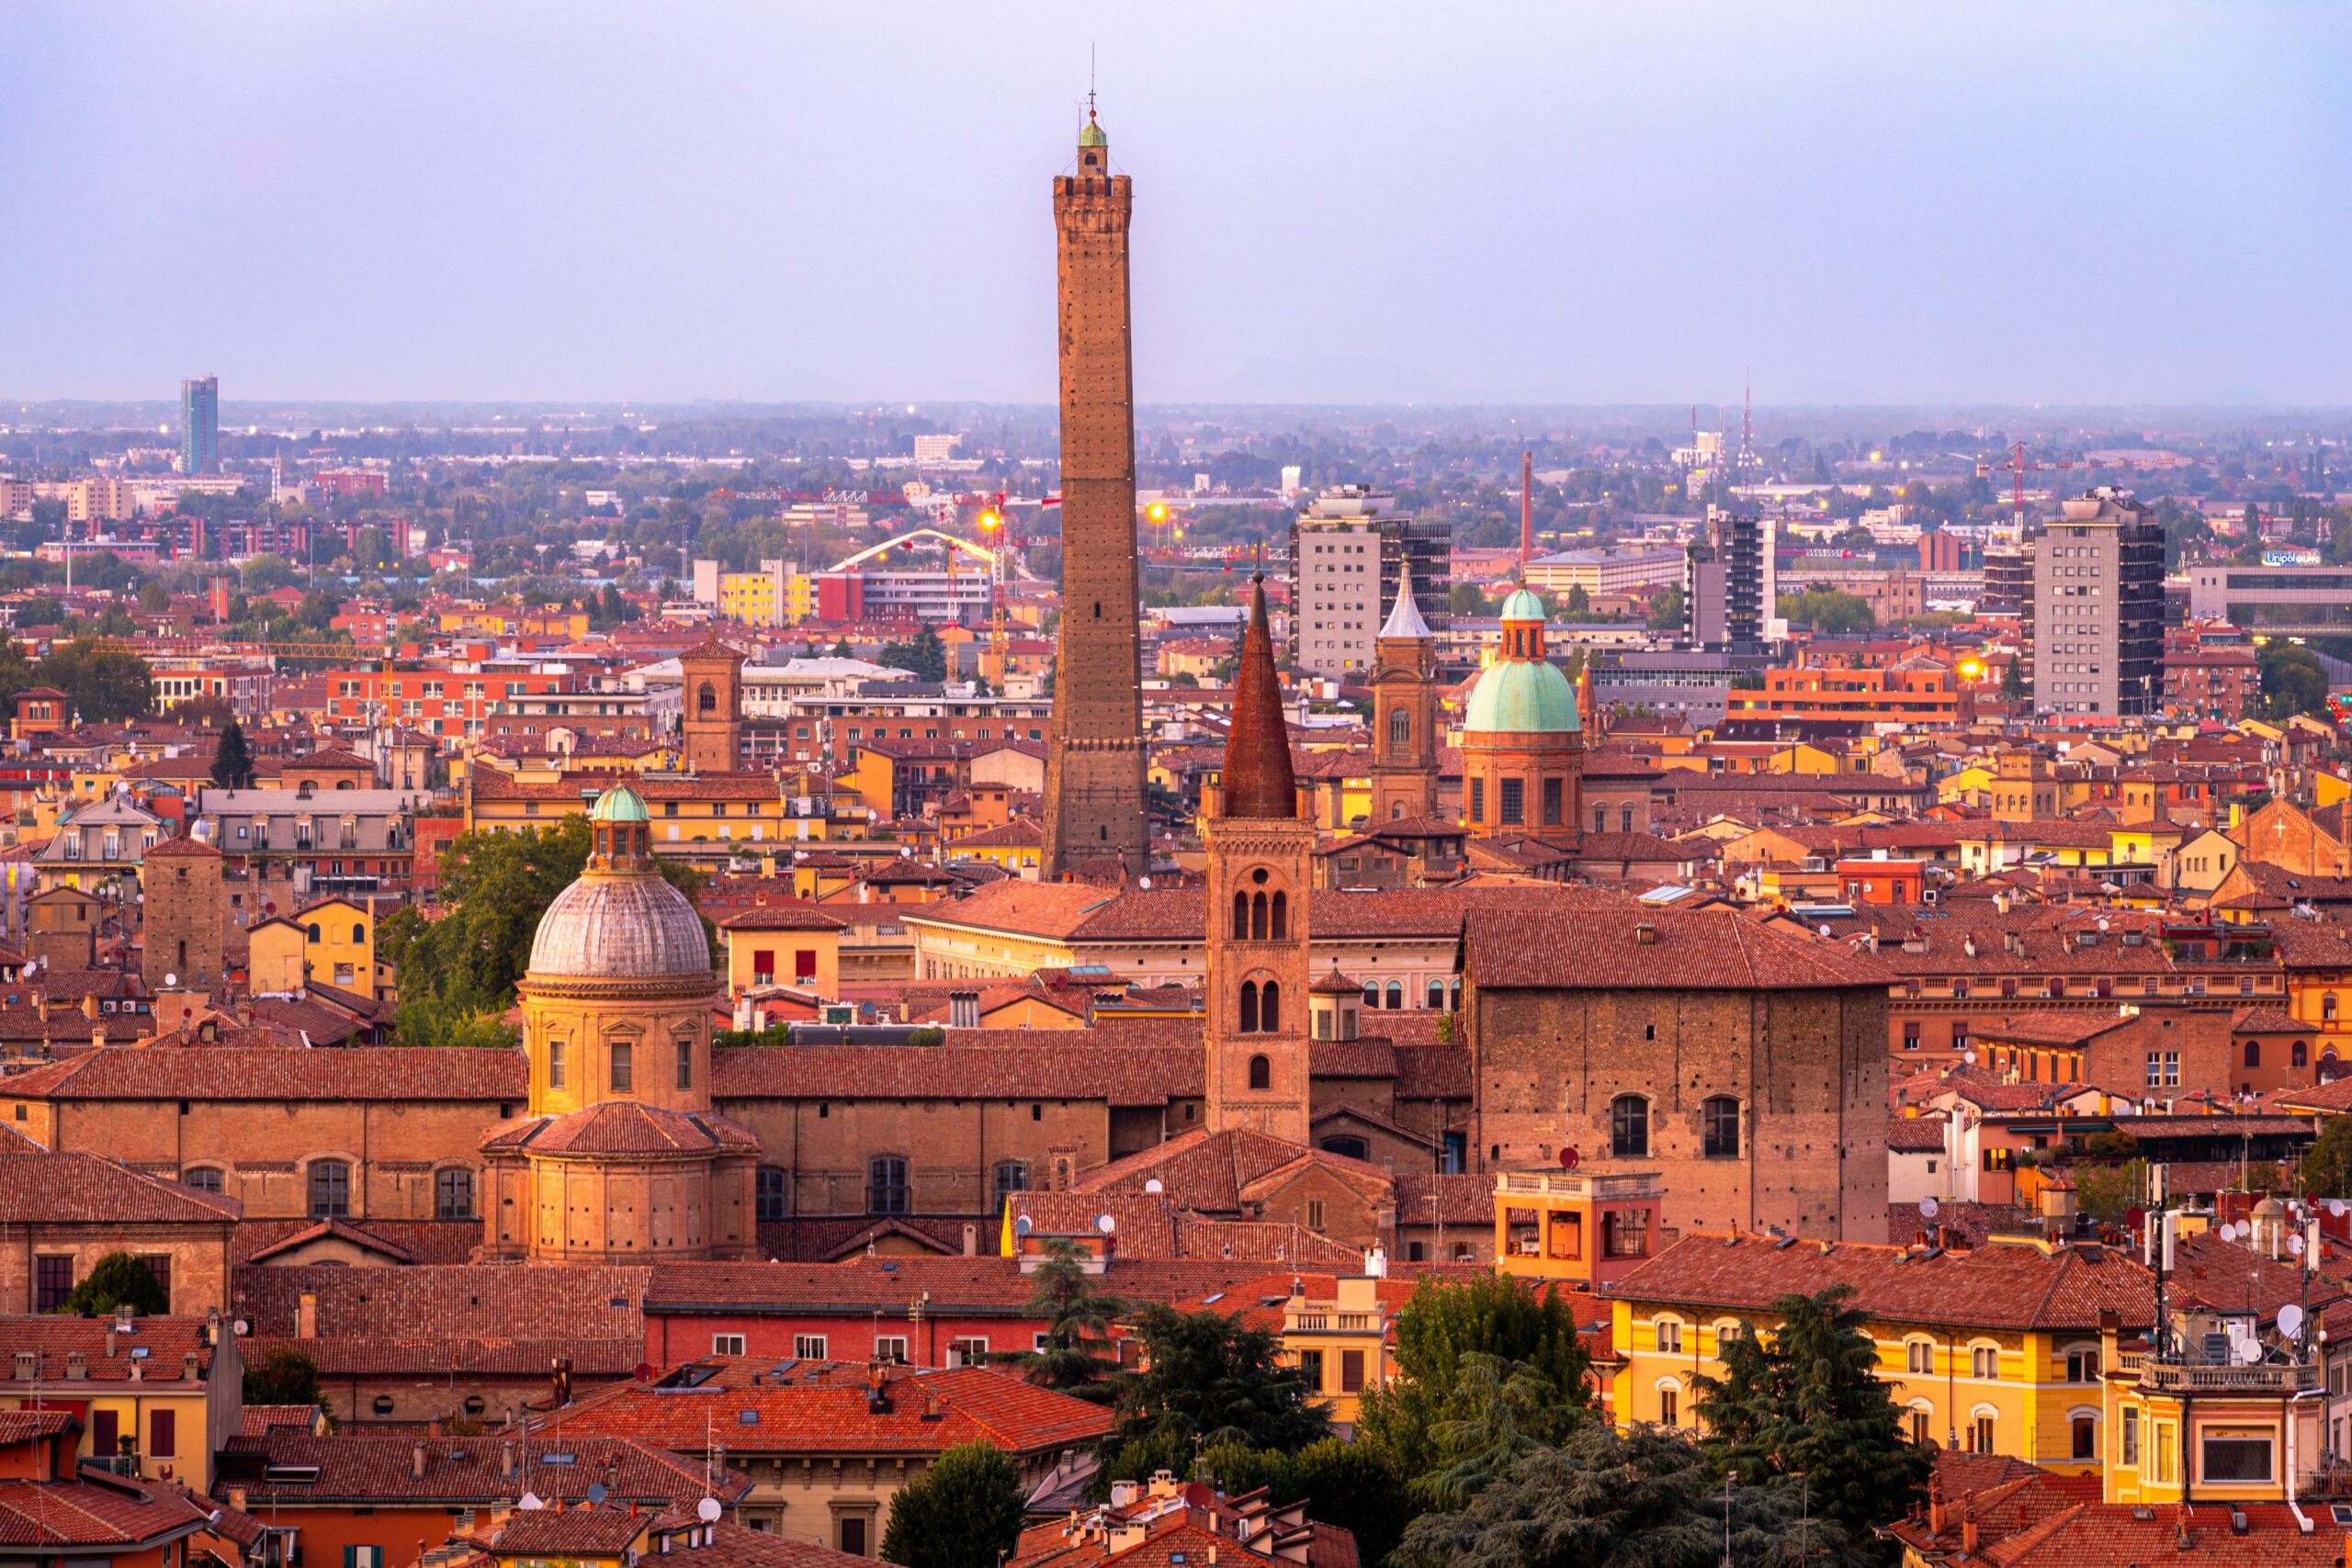 Bologna seen from above, Italy